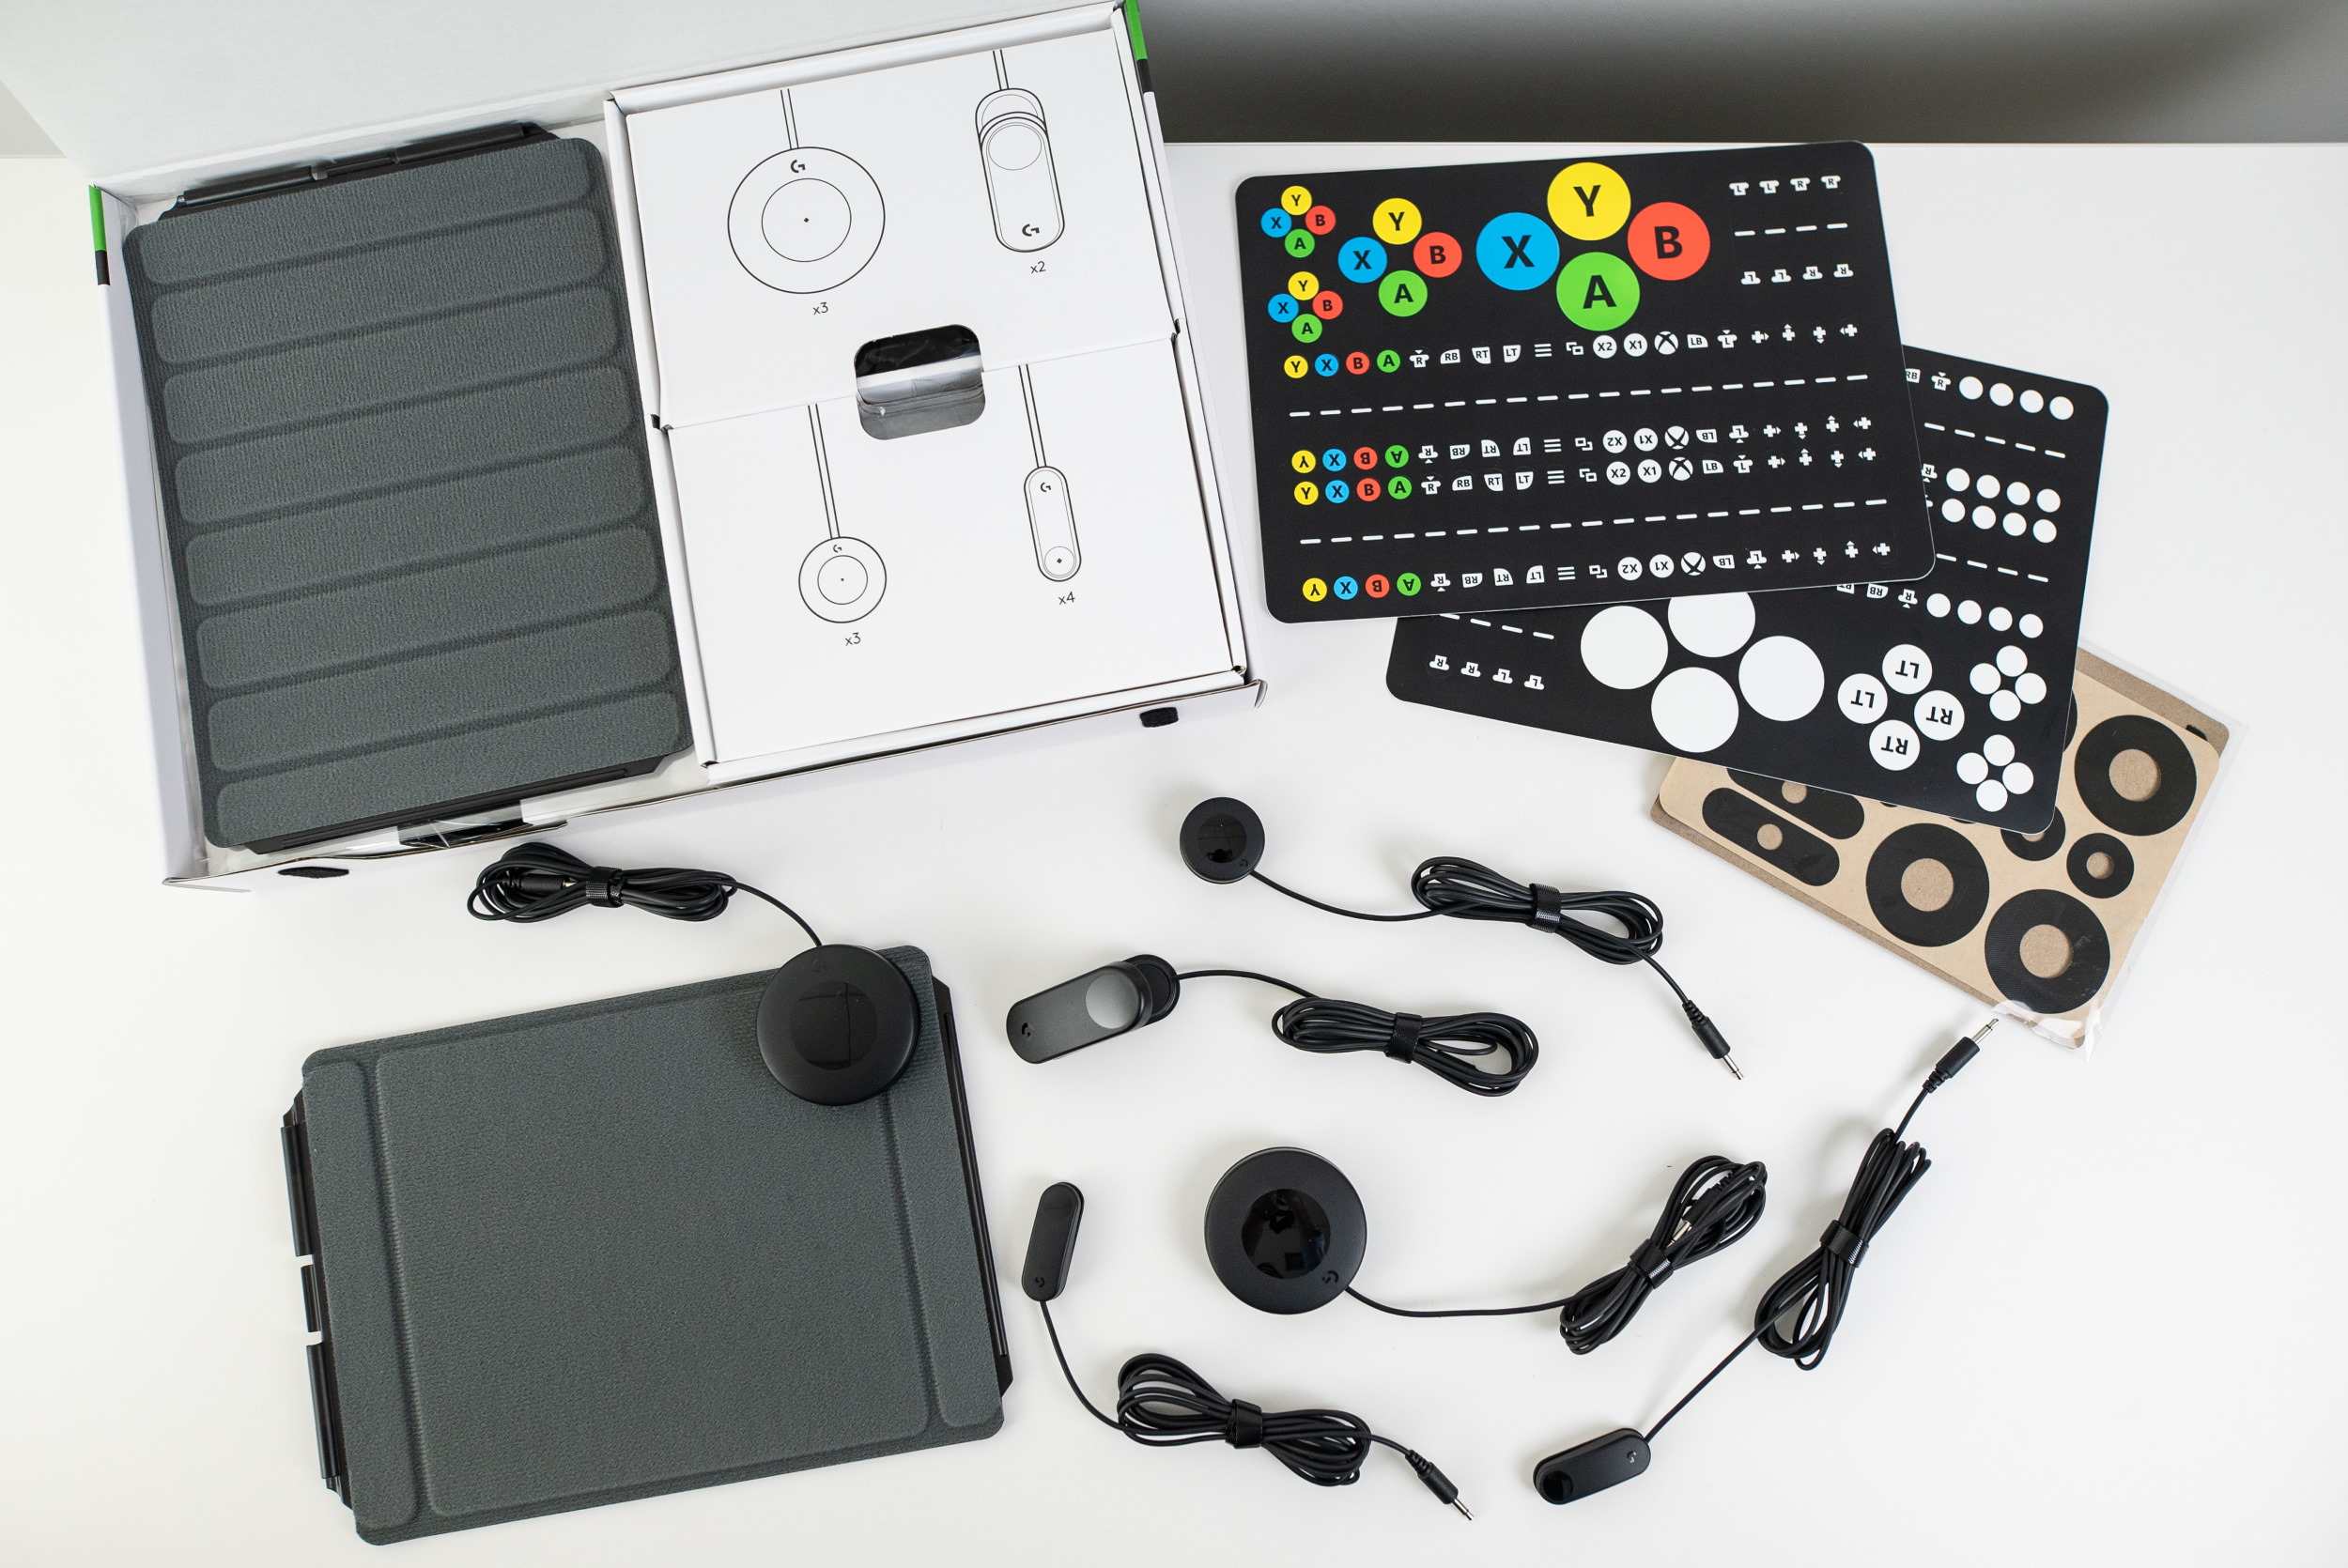 Logitech unveils an affordable button kit for the Xbox Adaptive Controller